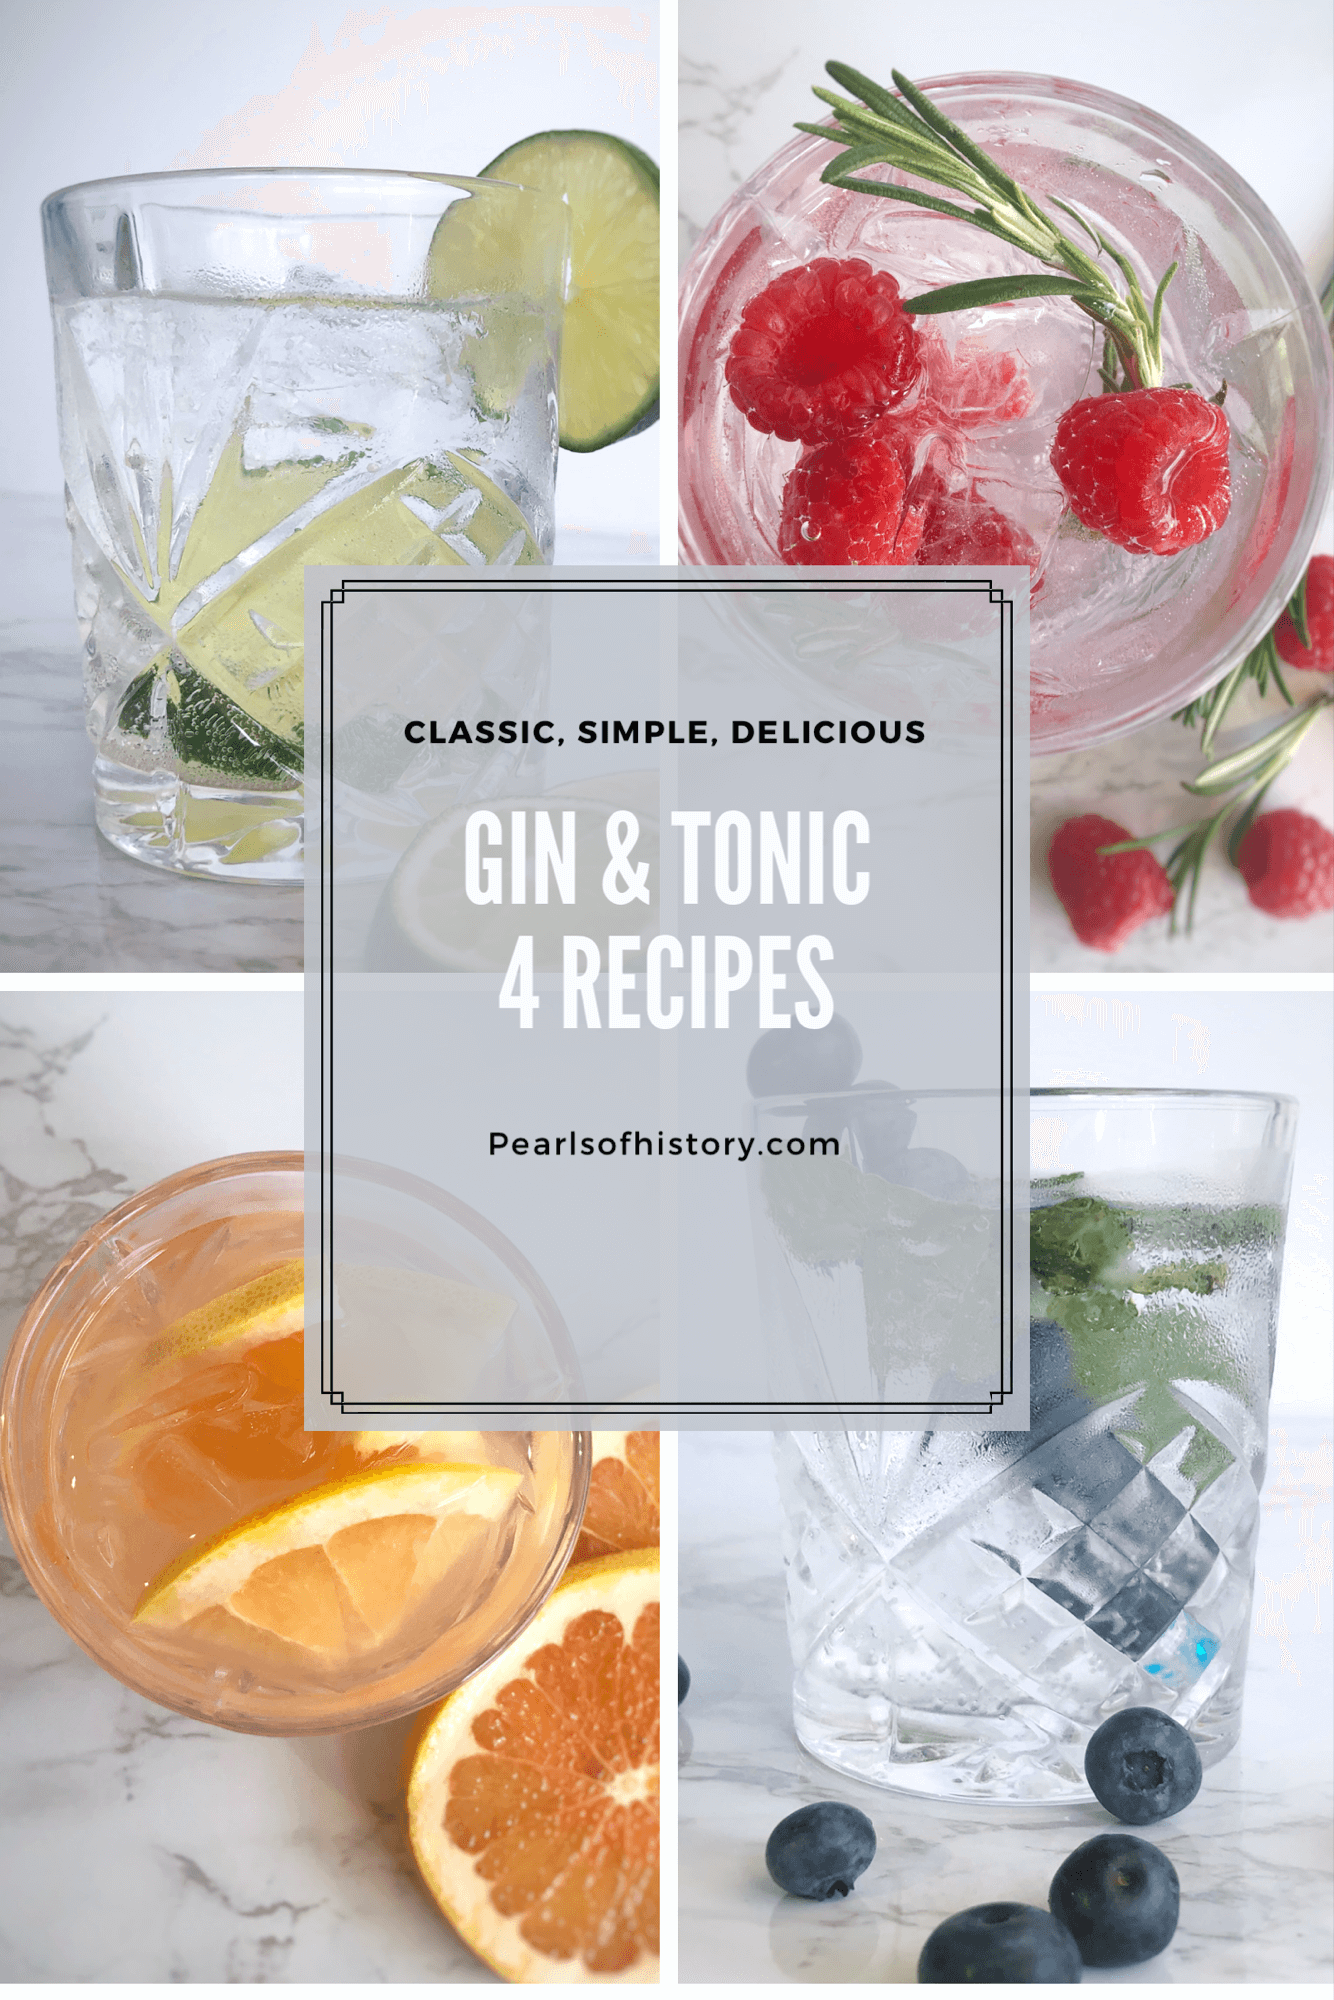 Gin and Tonic with Rosemary and Orange – Jim & Tonic